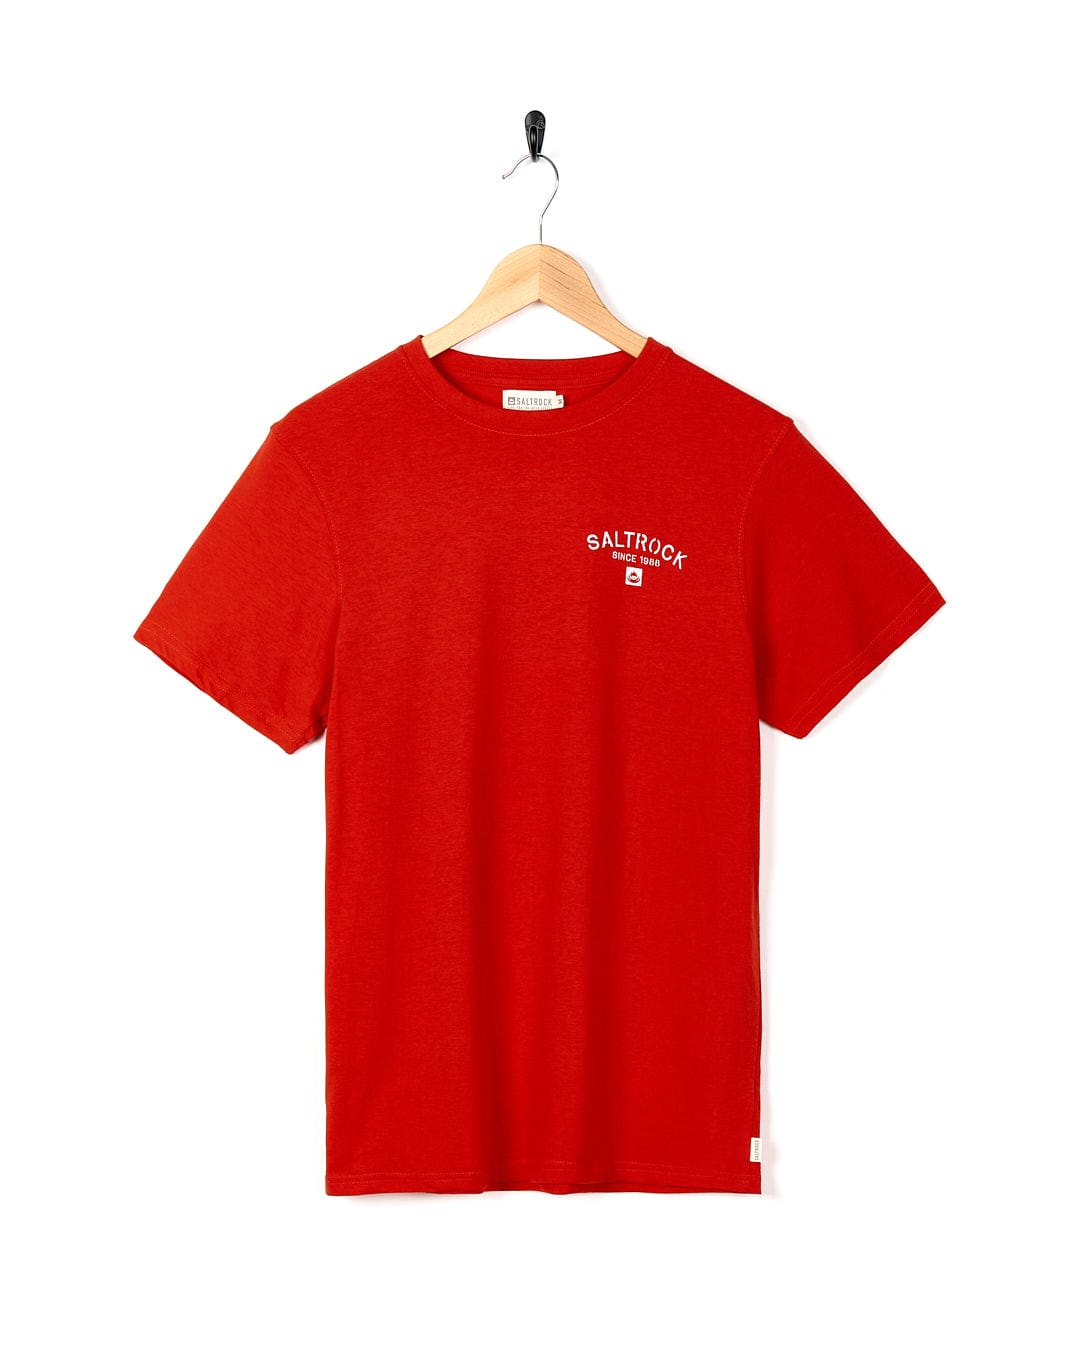 A Saltrock Stencil - Mens Location T-Shirt - Tenby - Red with a white logo on it.